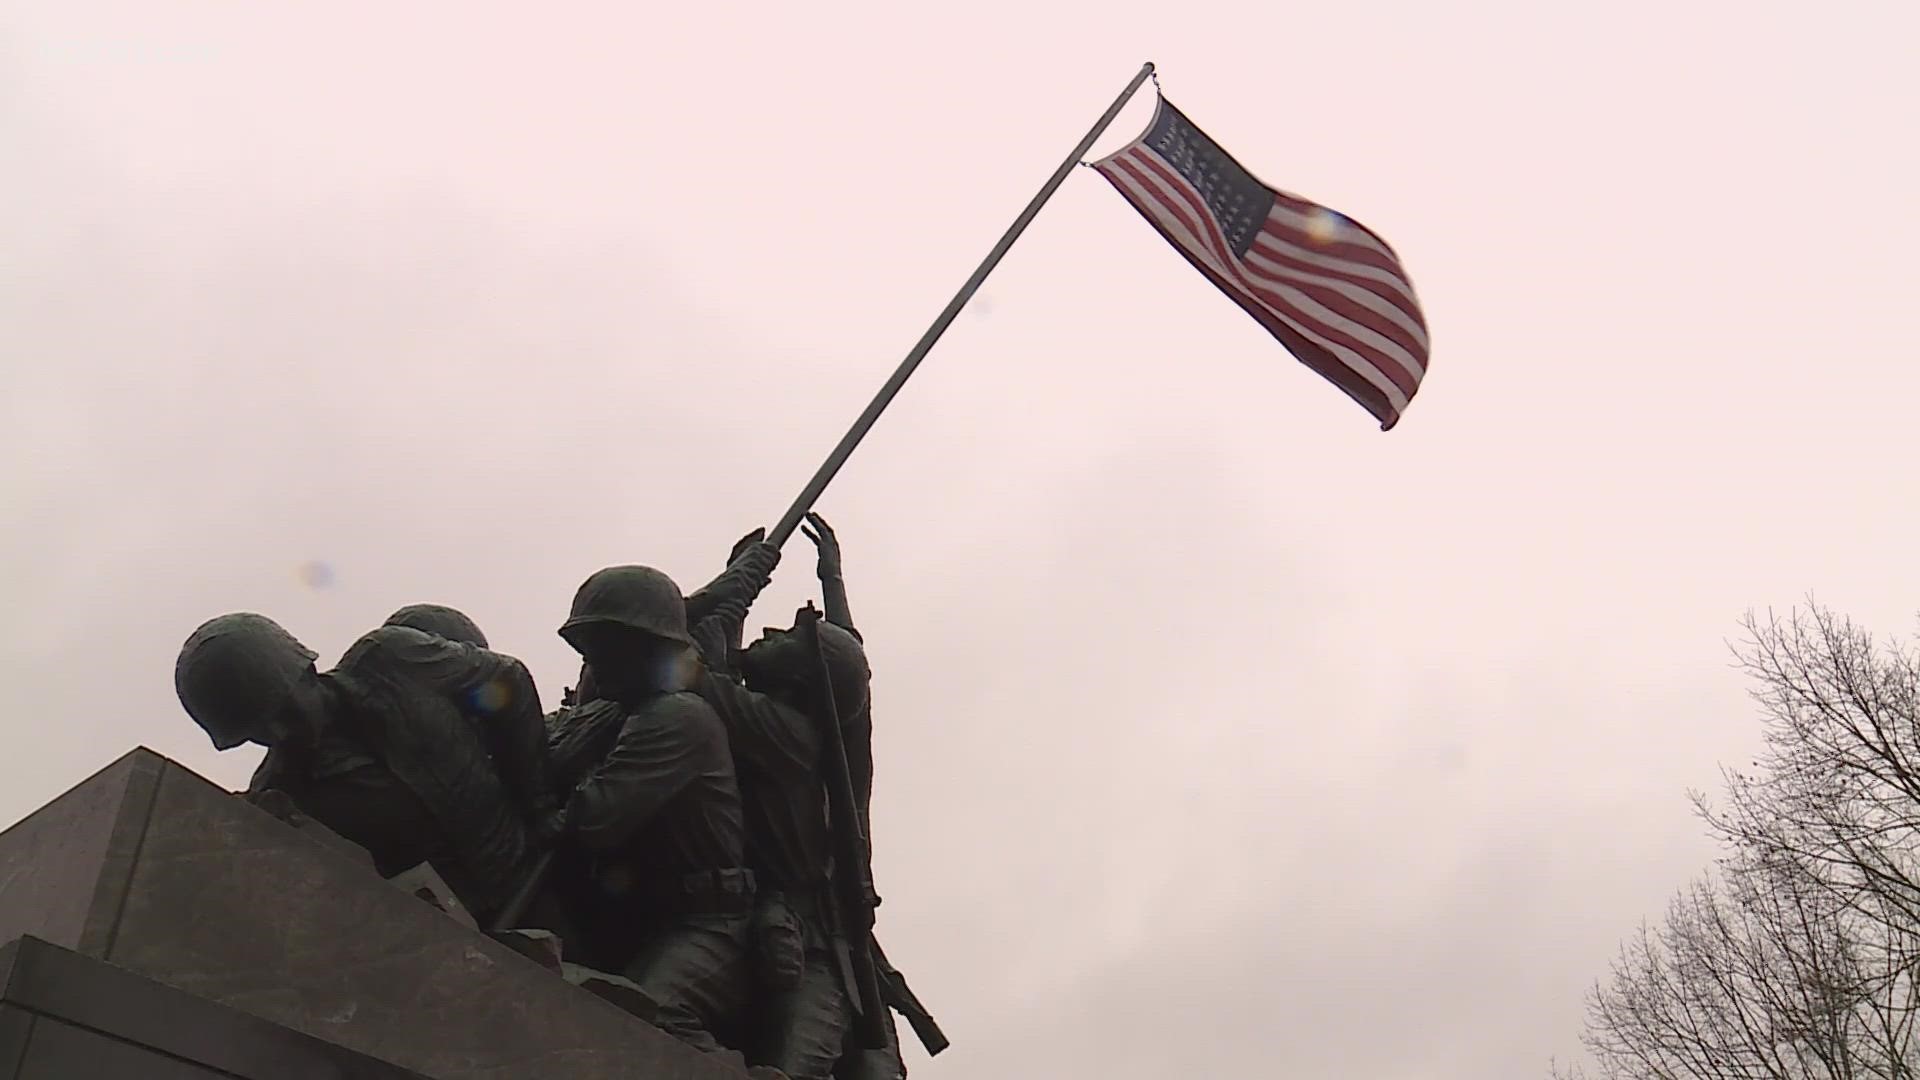 Every February at the Iwo Jima Memorial in New Britain, there is a gathering to honor those 100 Connecticut servicemen lost on Iwo Jima.